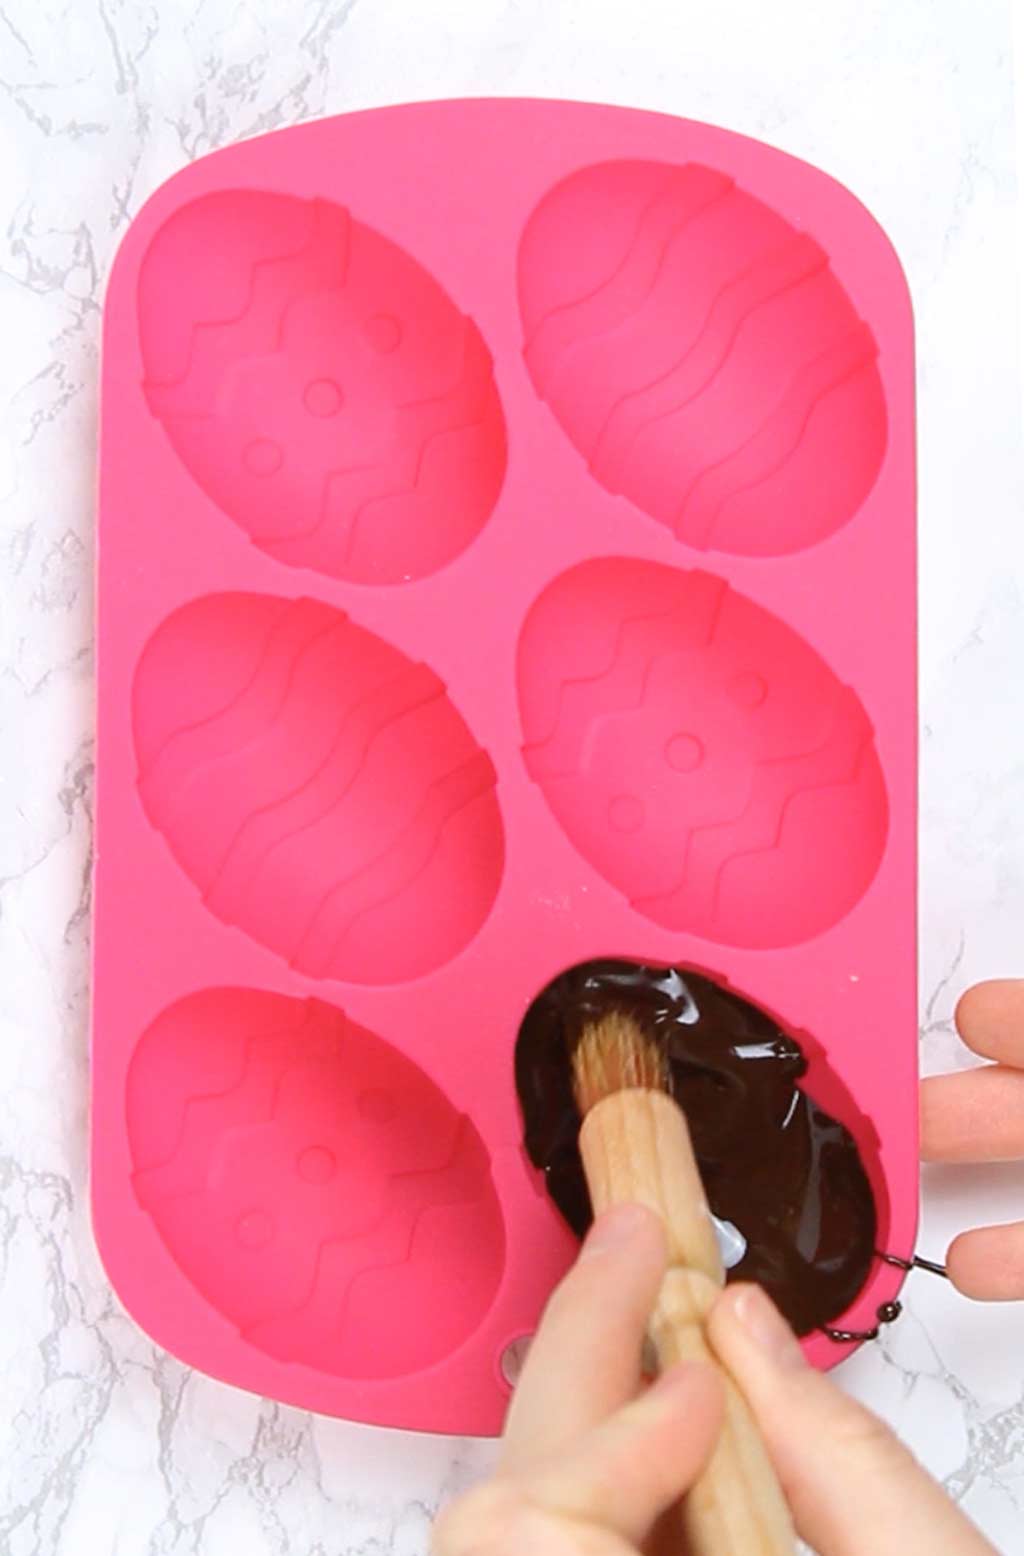 using a pastry brush to spread chocolate into the egg mold